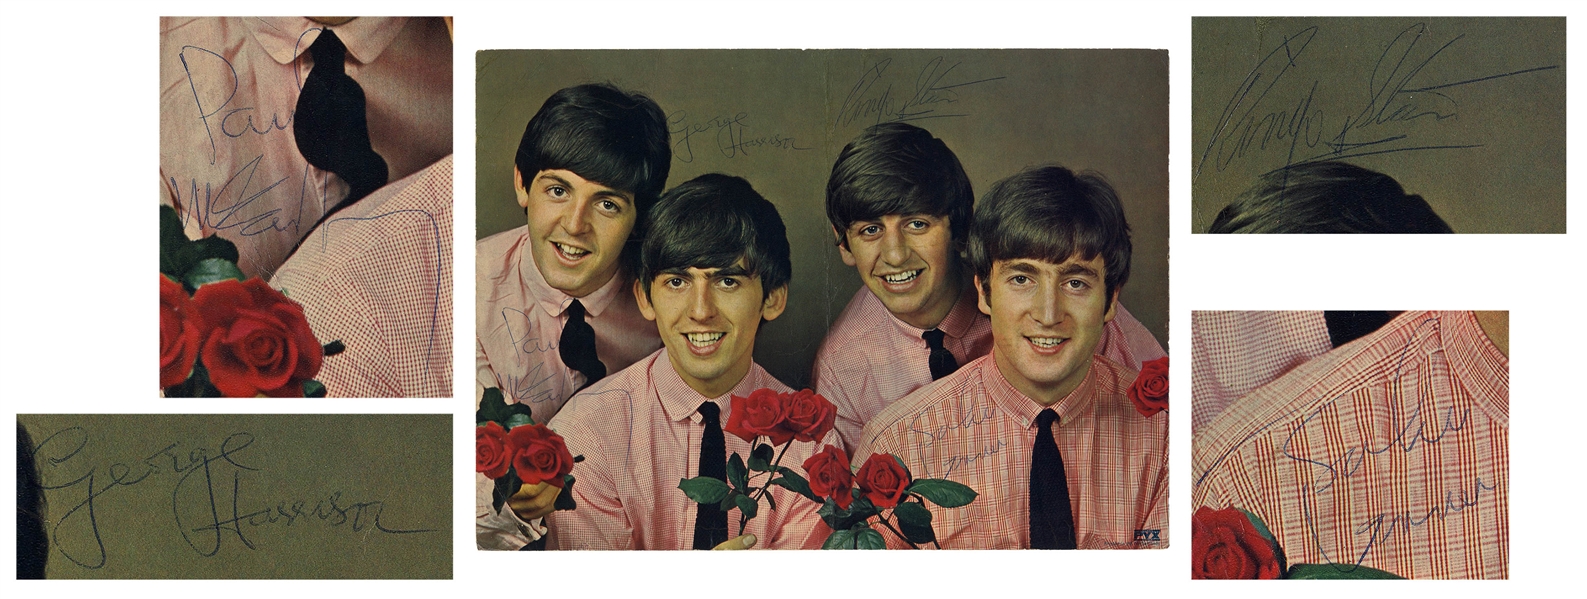 The Beatles Signed 12.25'' x 9'' Photo, Signed by Paul McCartney, John Lennon, George Harrison & Ringo Starr -- With Beckett COA for All Four Signatures